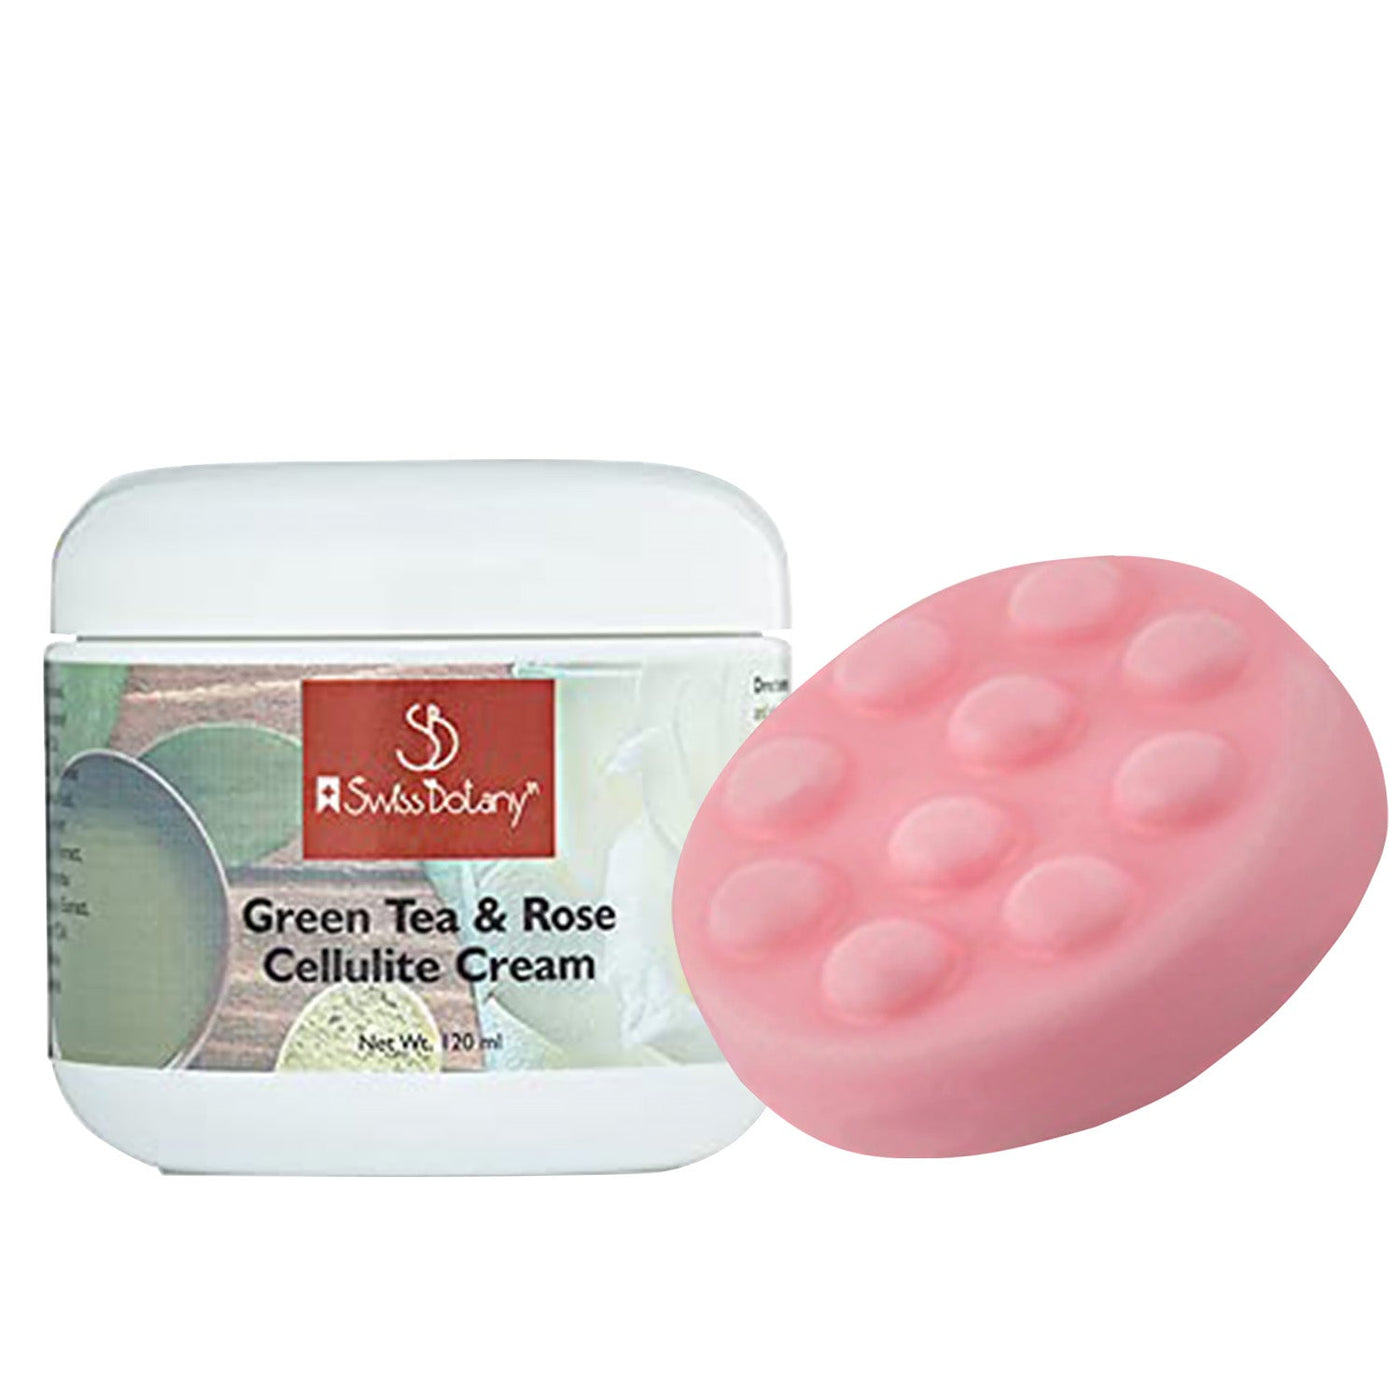 Swiss Botany Beauty Booty Lifter Soap & Cellulite Cream